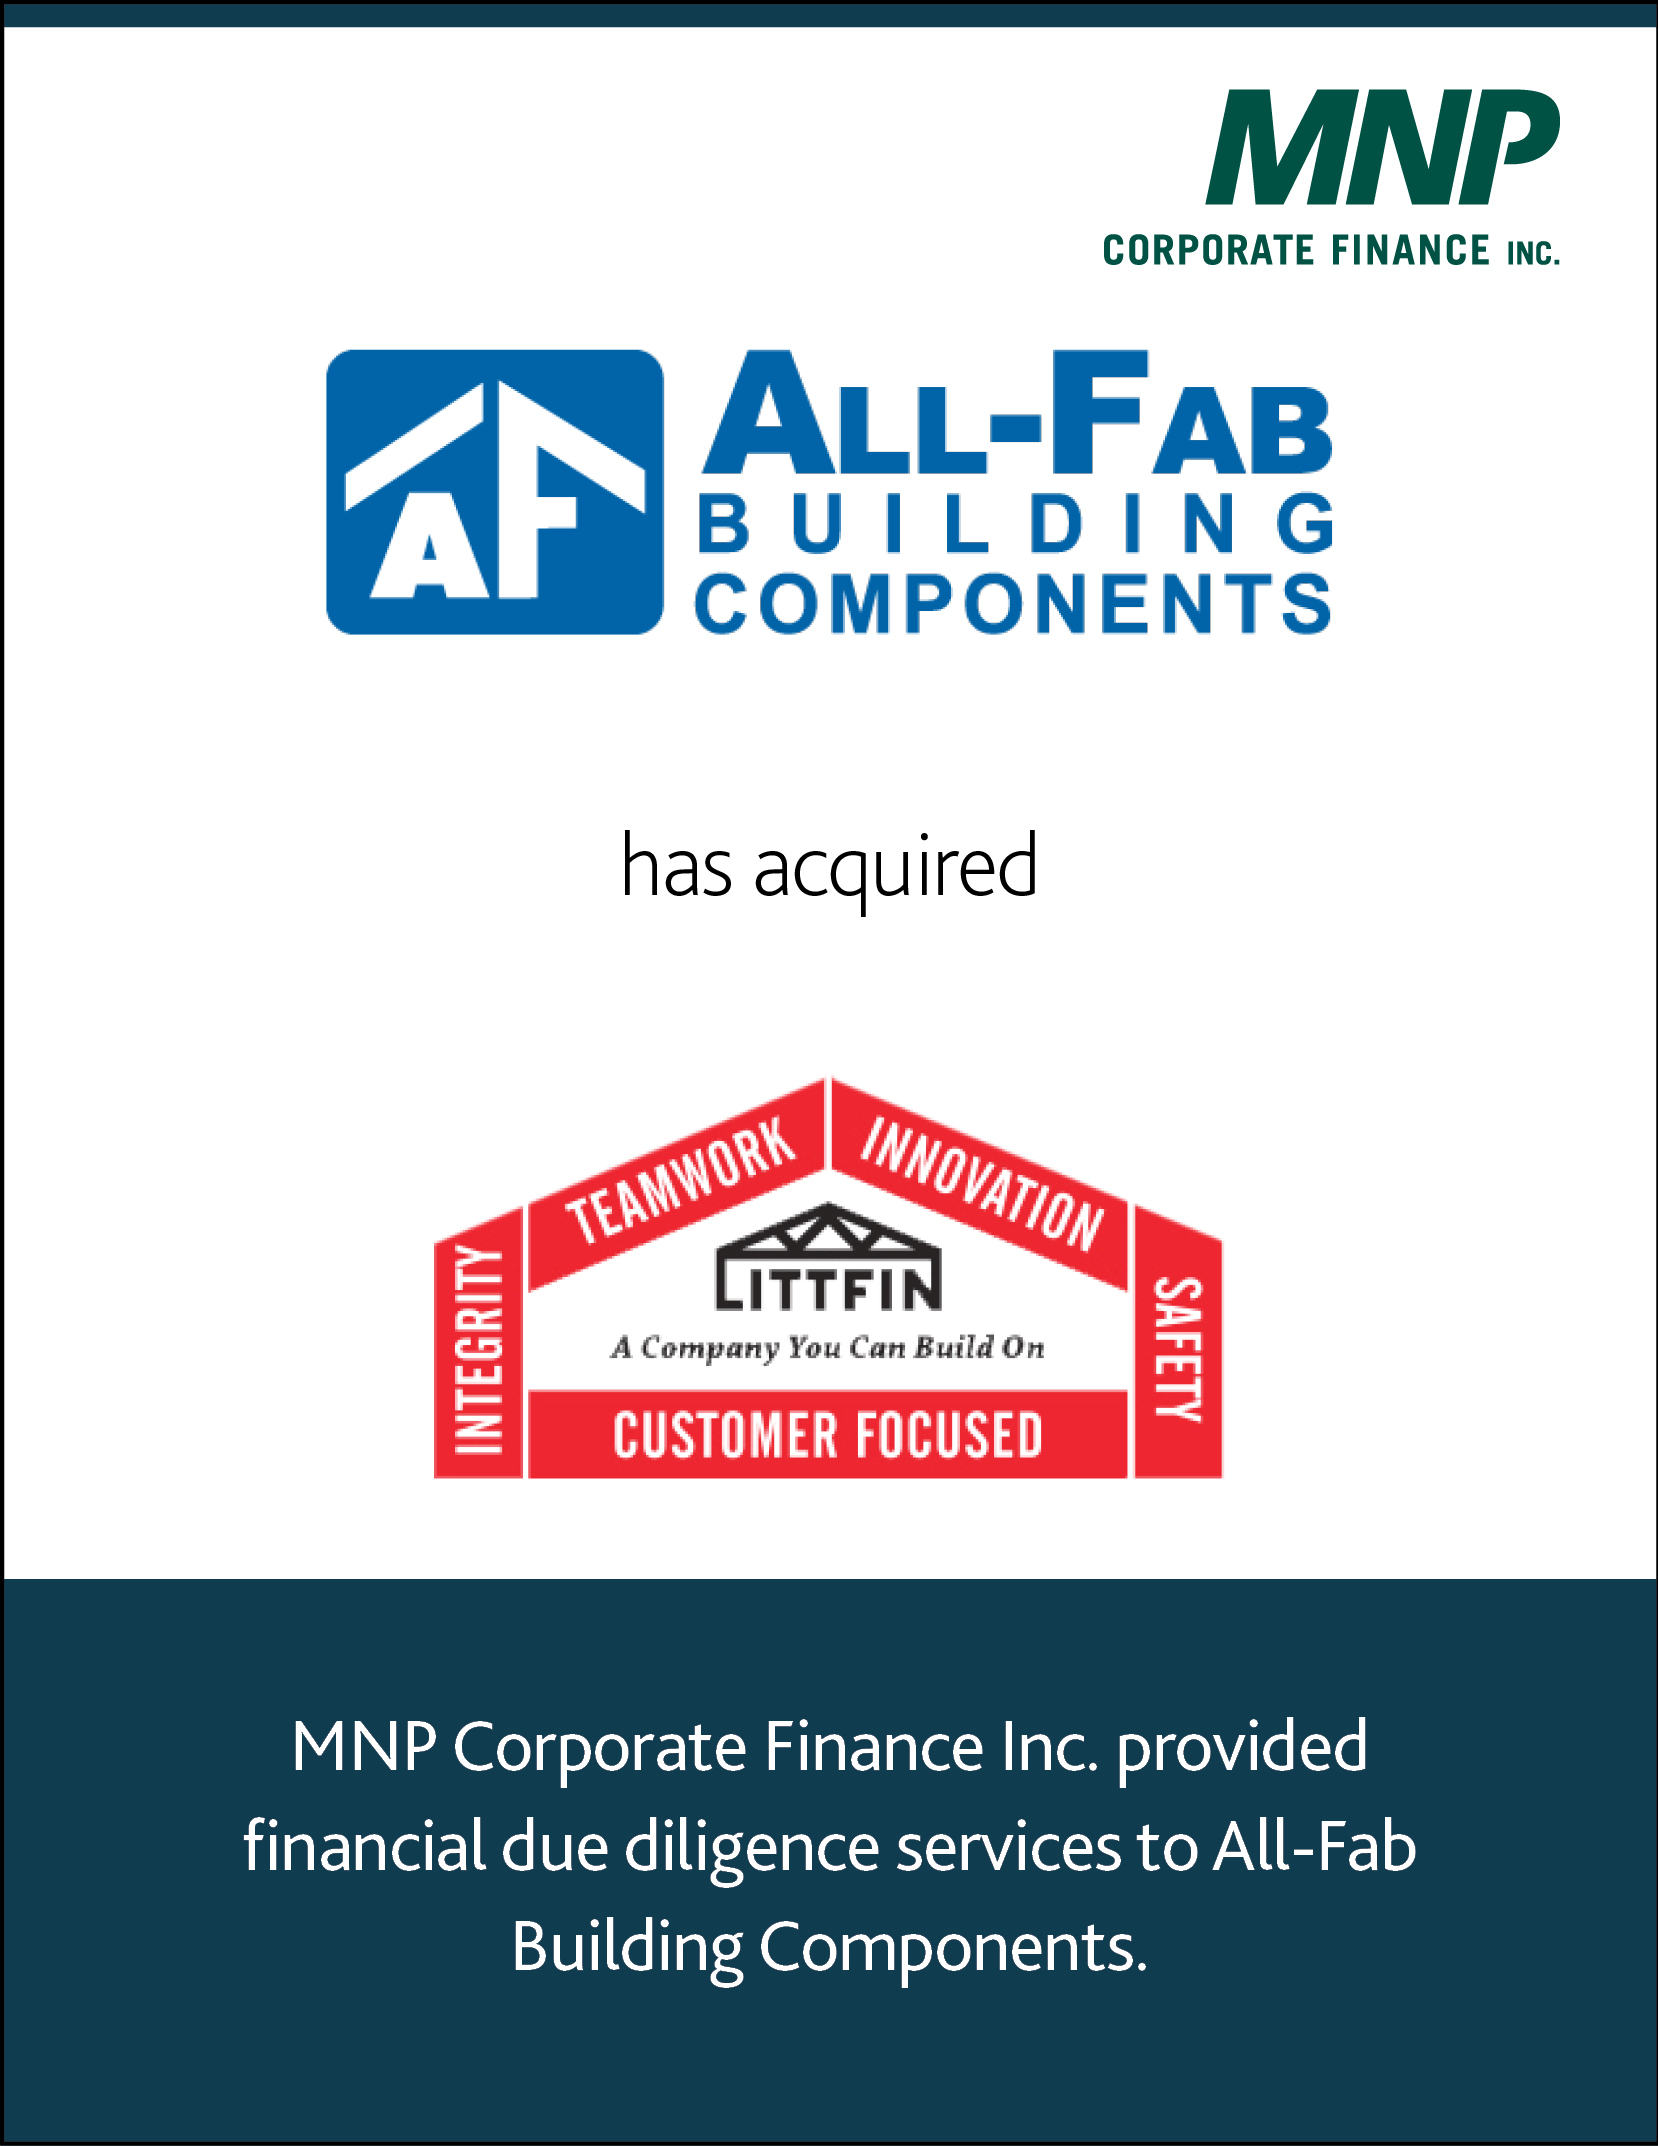 All-Fab Building Components has acquired Littfin